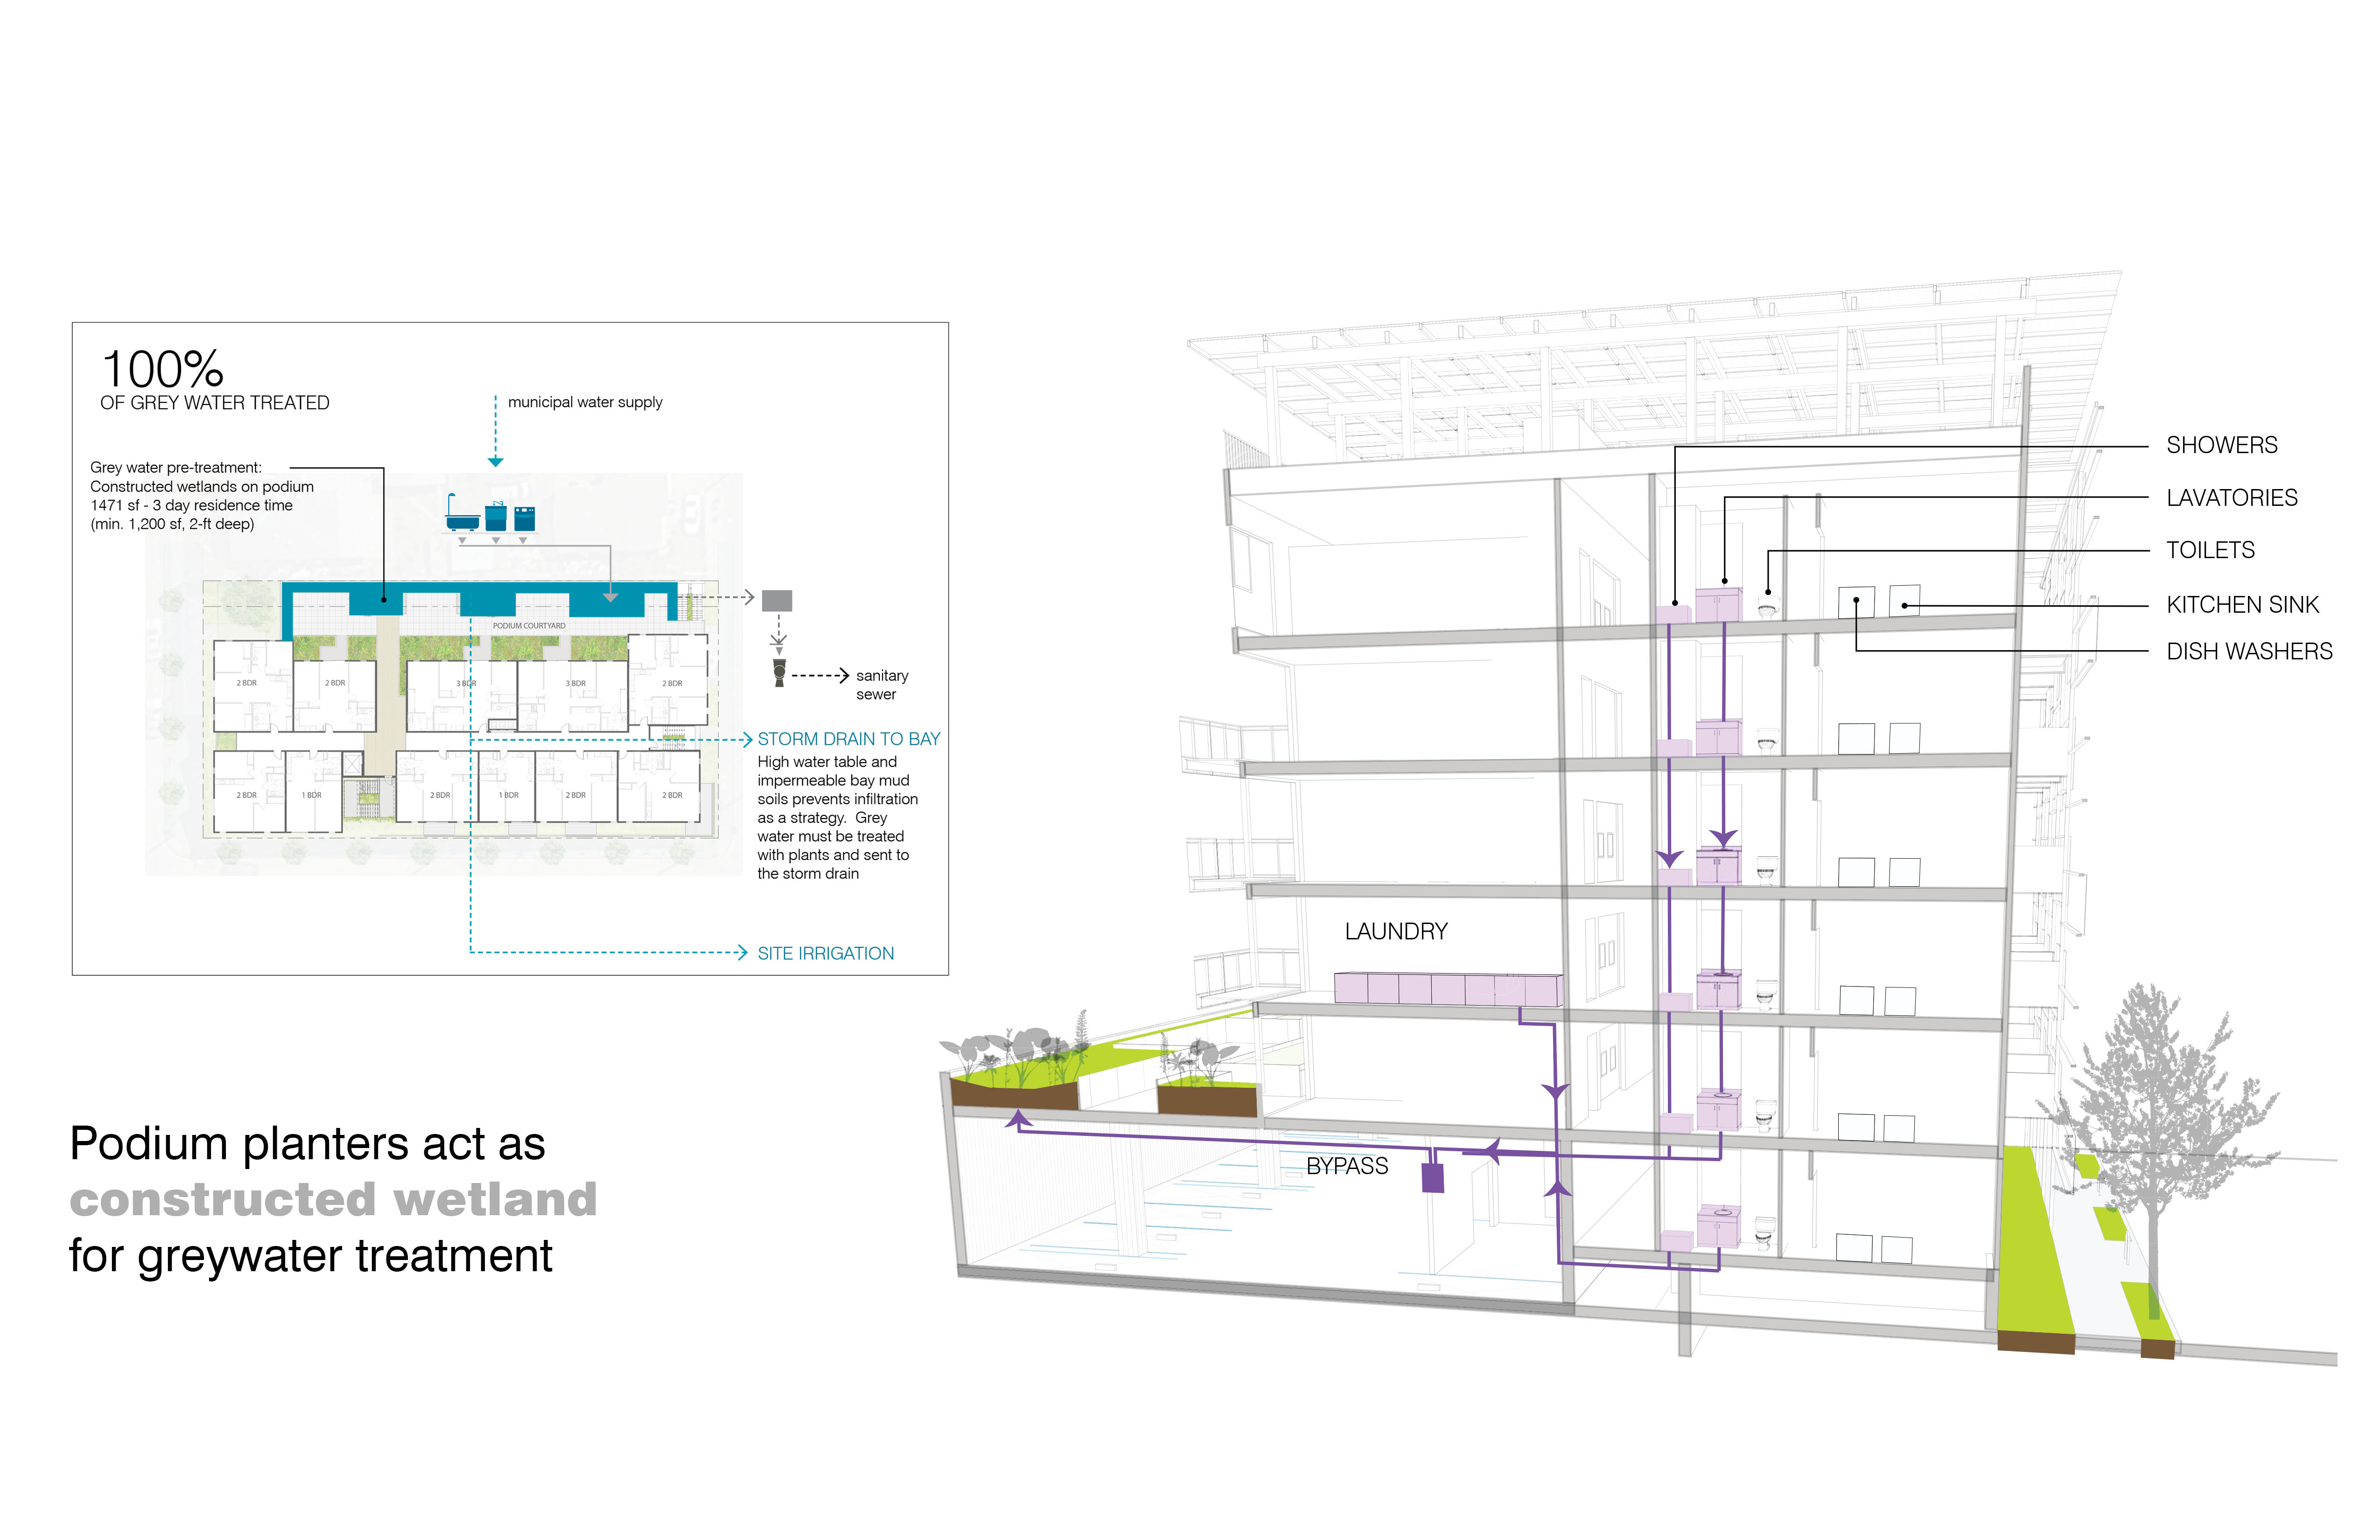 Diagram for greywater supply for Coliseum Place, affordable housing in Oakland, Ca